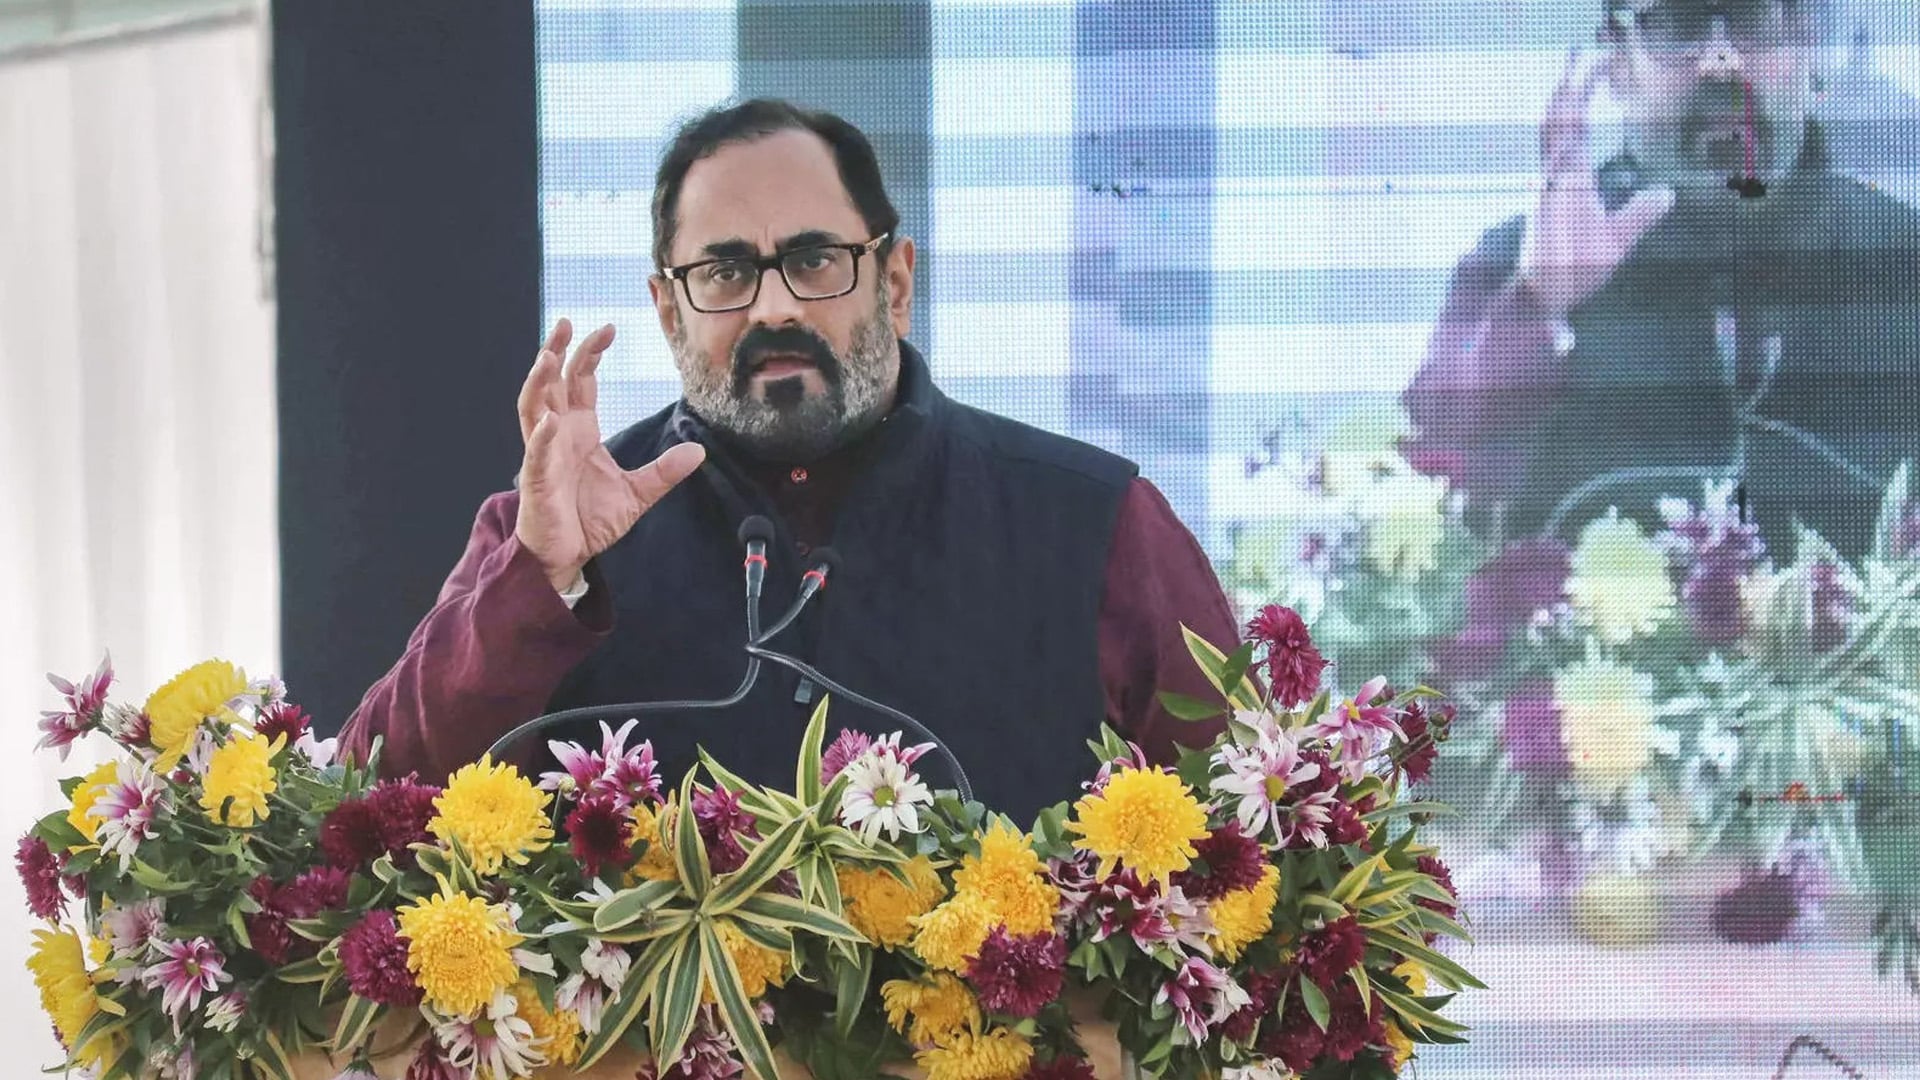 Govt committed to backing industry in developing cutting-edge competitive systems: Rajeev Chandrasekhar